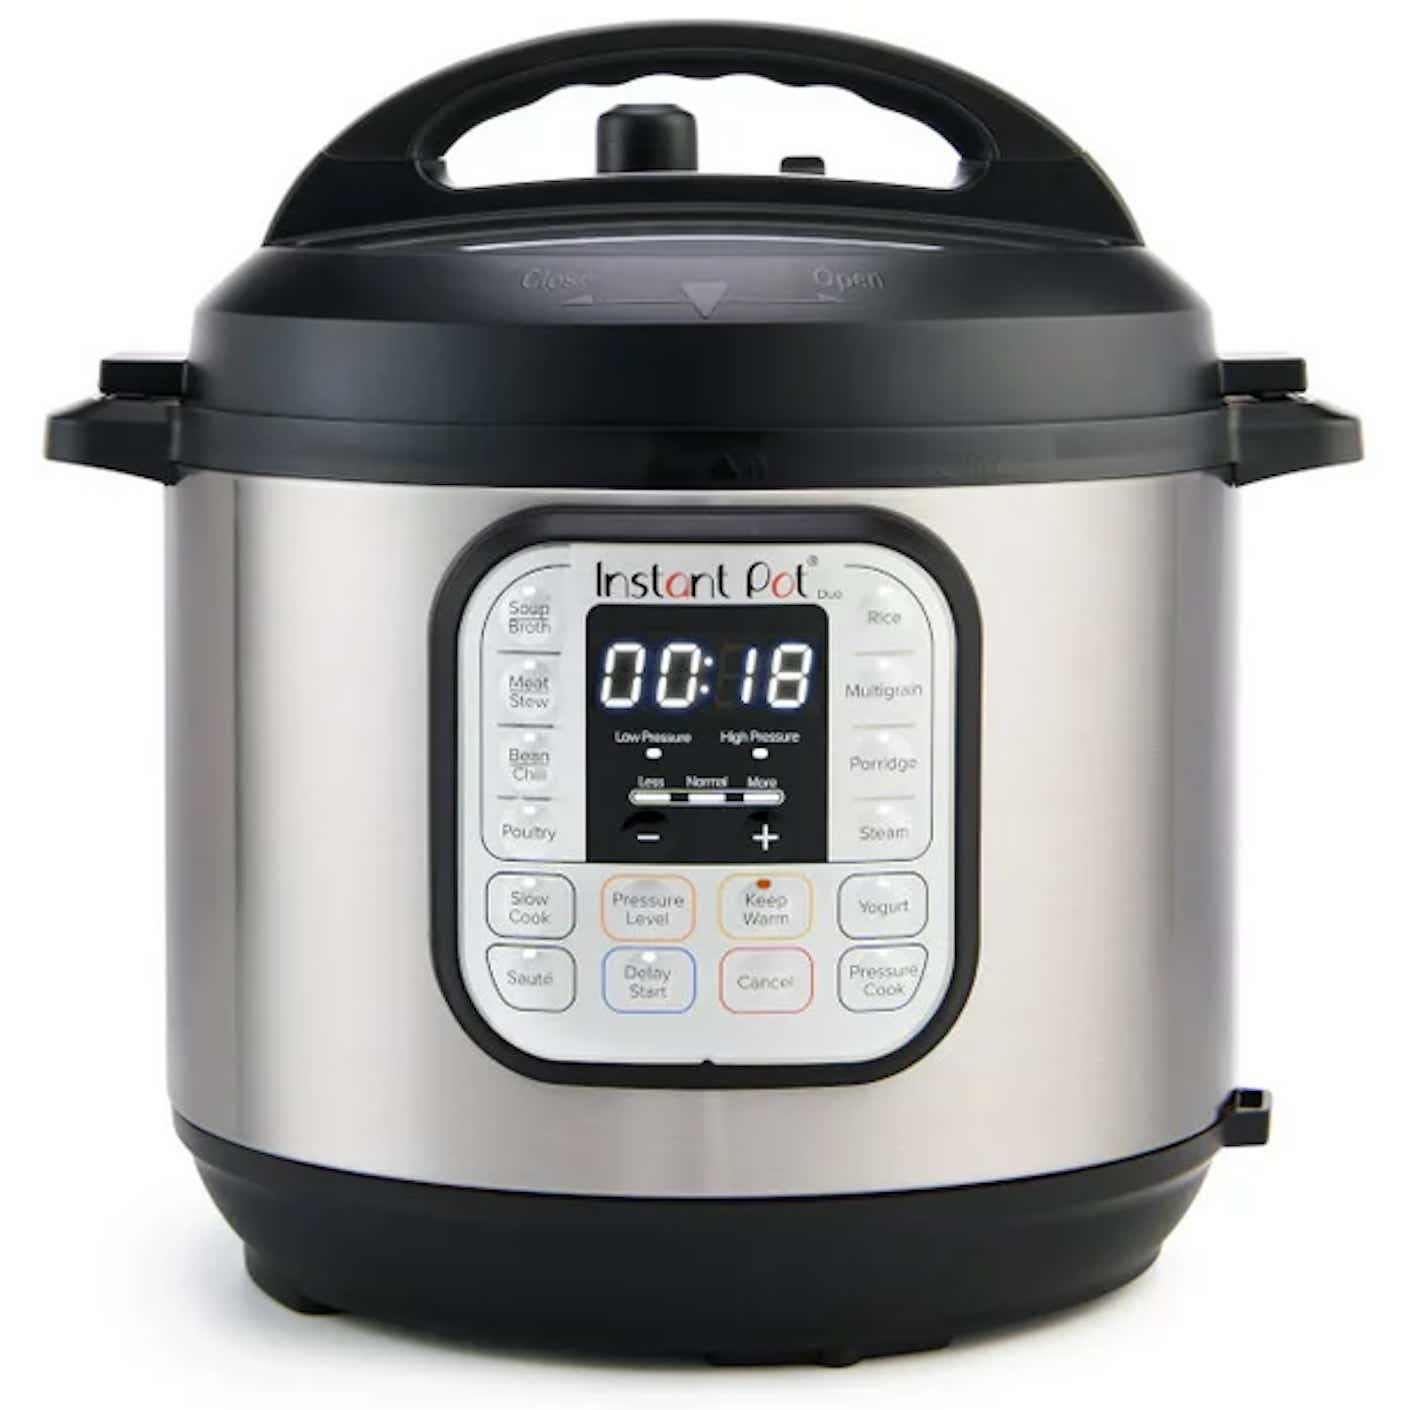 A metal Instant Pot with black accents shown in front of a white background.